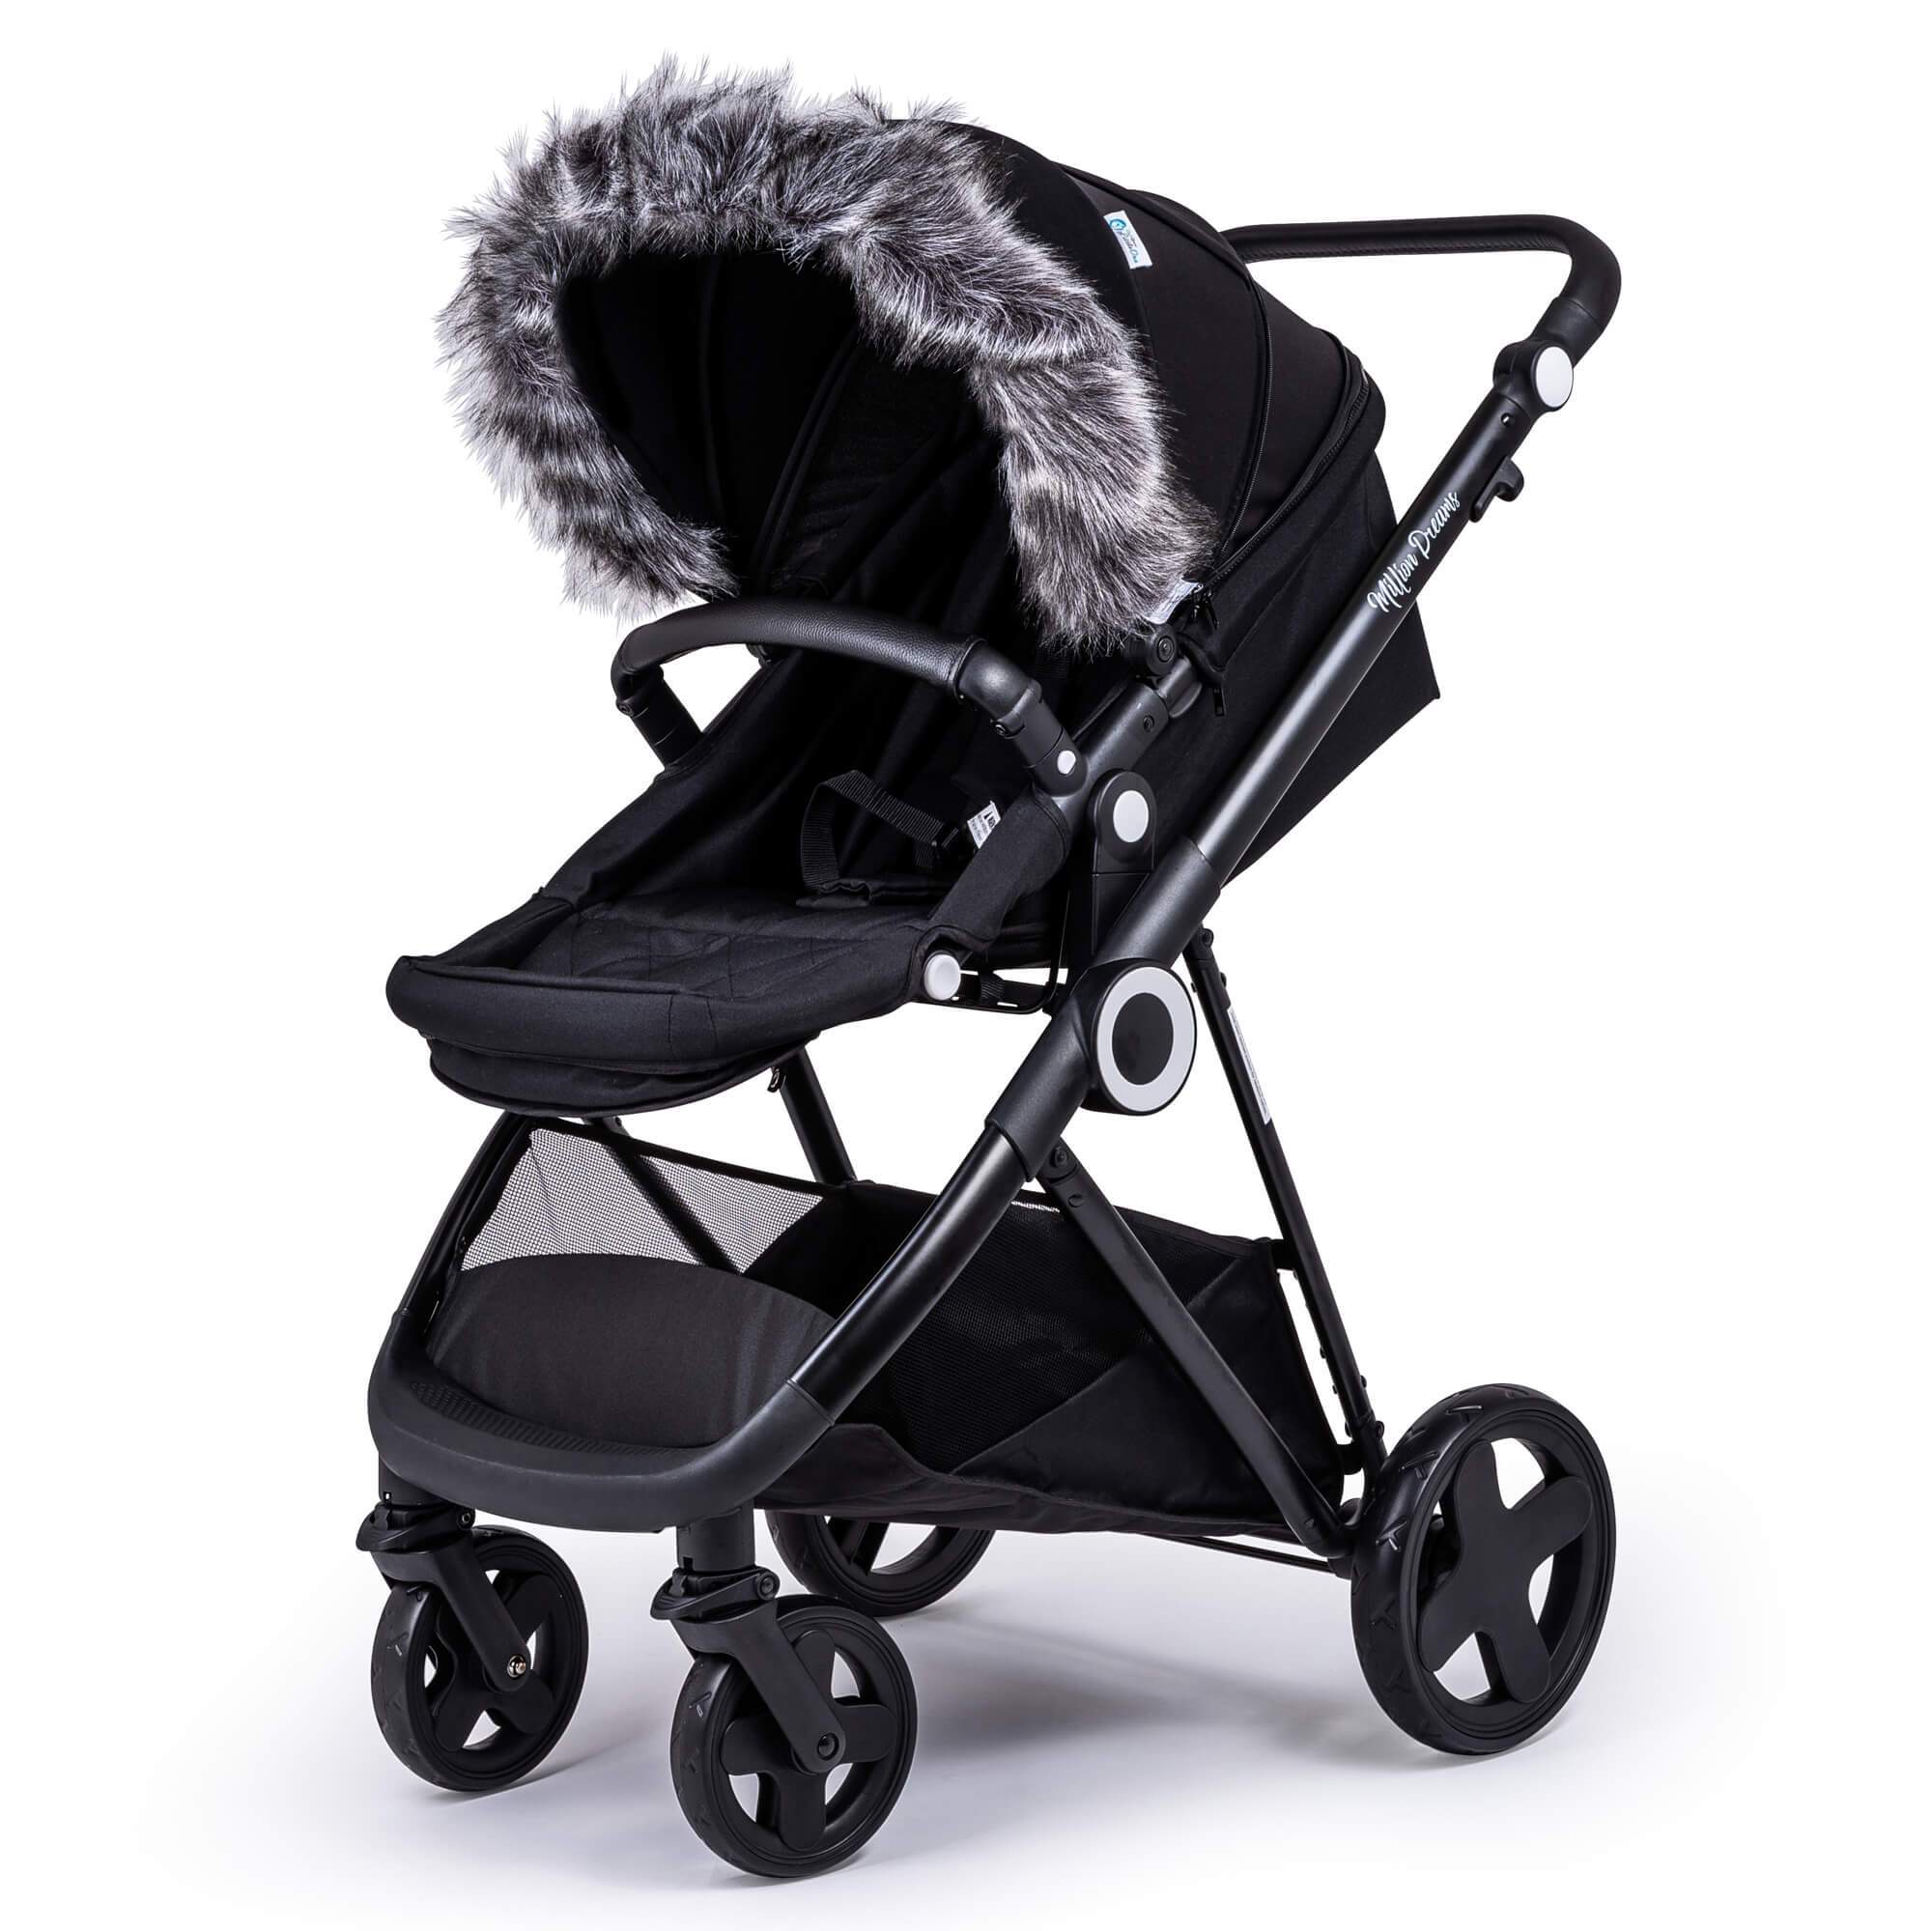 Pram Fur Hood Trim Attachment for Pushchair Compatible with Uppababy - Dark Grey / Fits All Models | For Your Little One